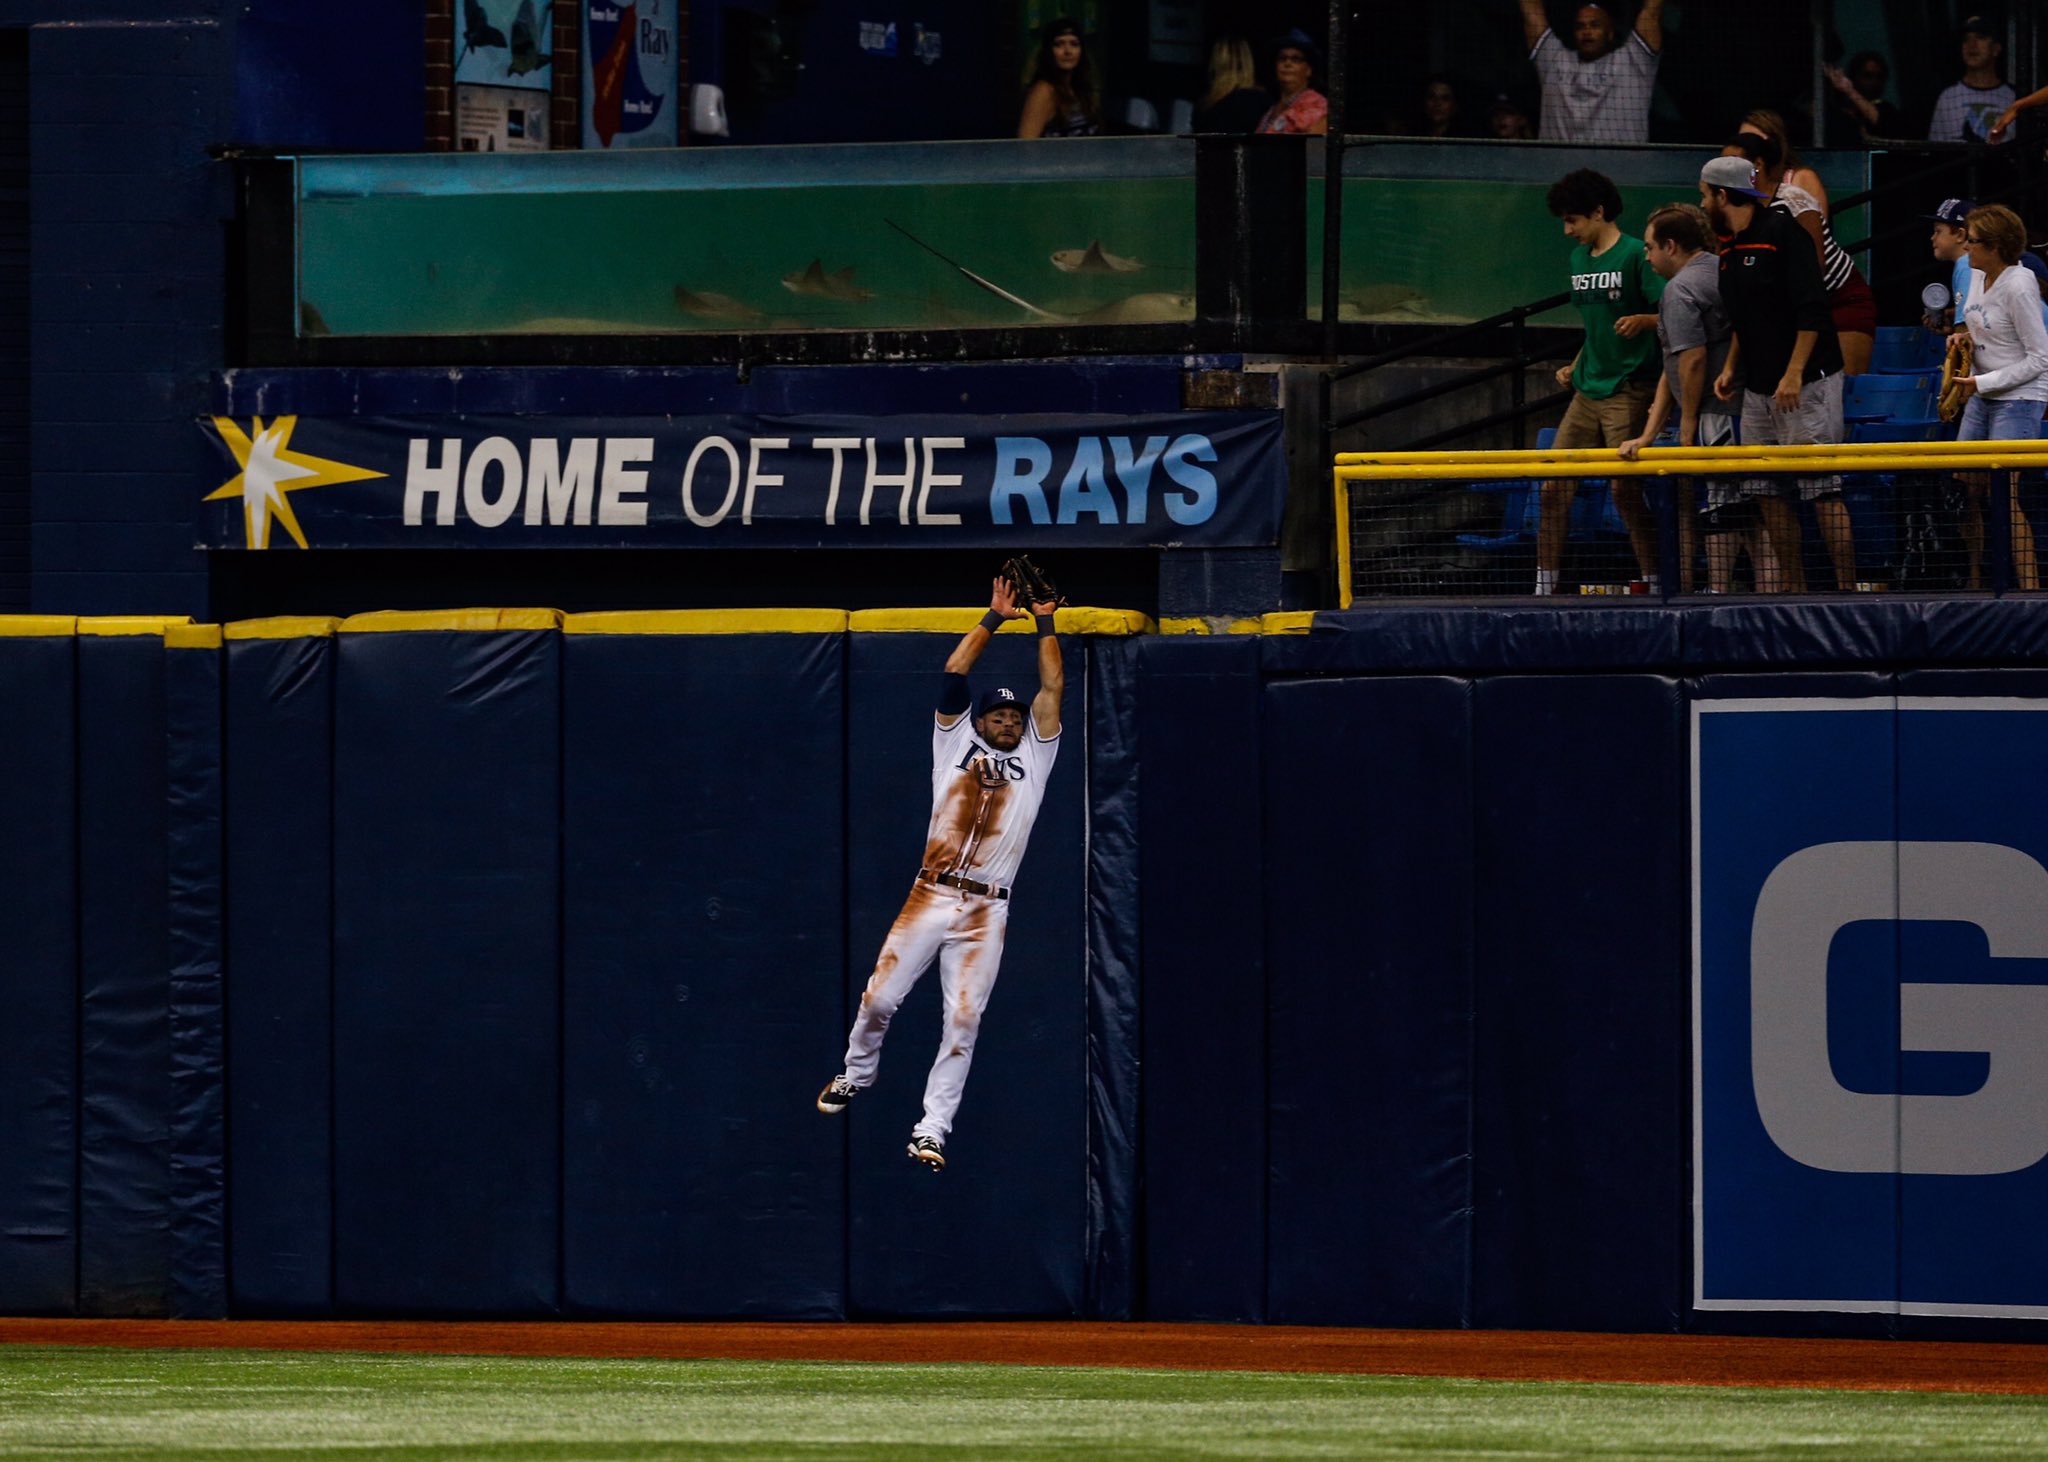 With catches like this gem from last night, it makes you wonder where the Rays would be hadn't Kevin Kiermaier missed two months of the season. (Photo Credit: Tampa Bay Rays)